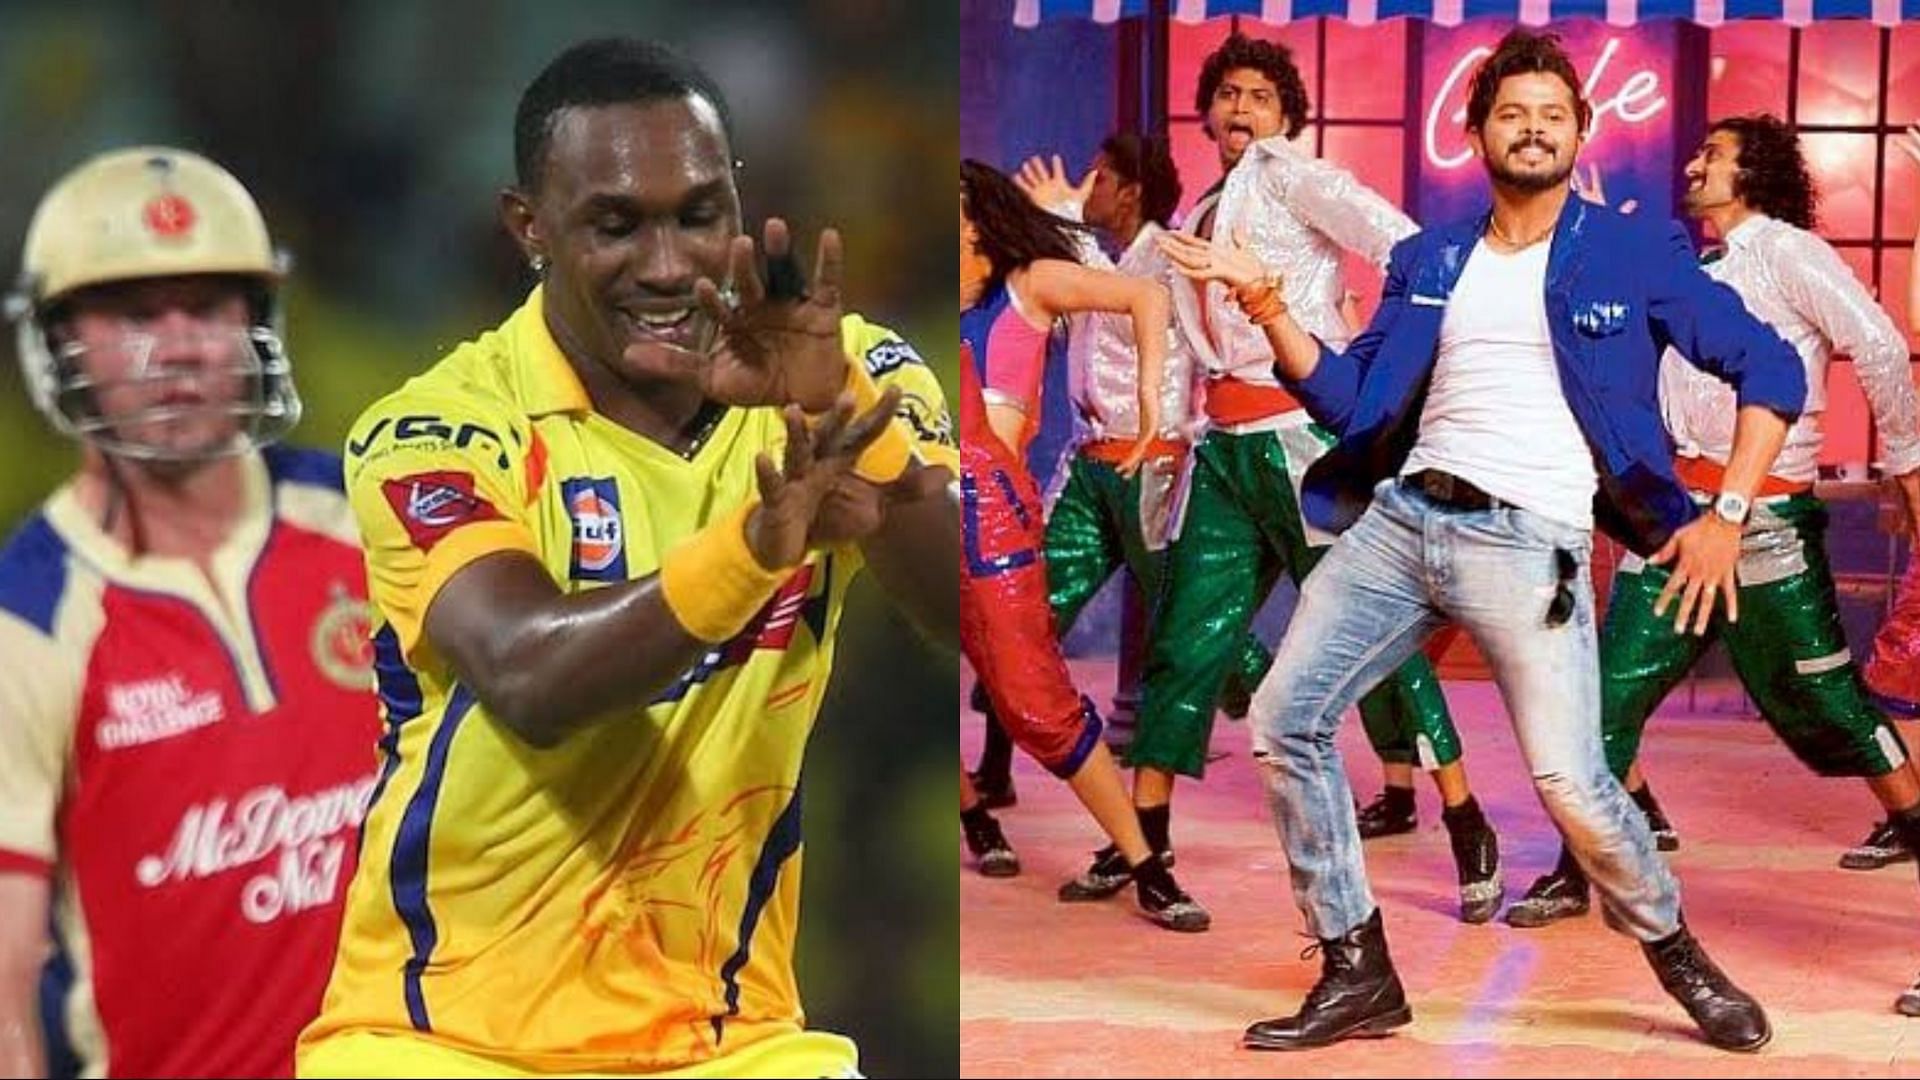 Cricketers like Dwayne Bravo and Sreesanth have amazed the audience with their dancing skills